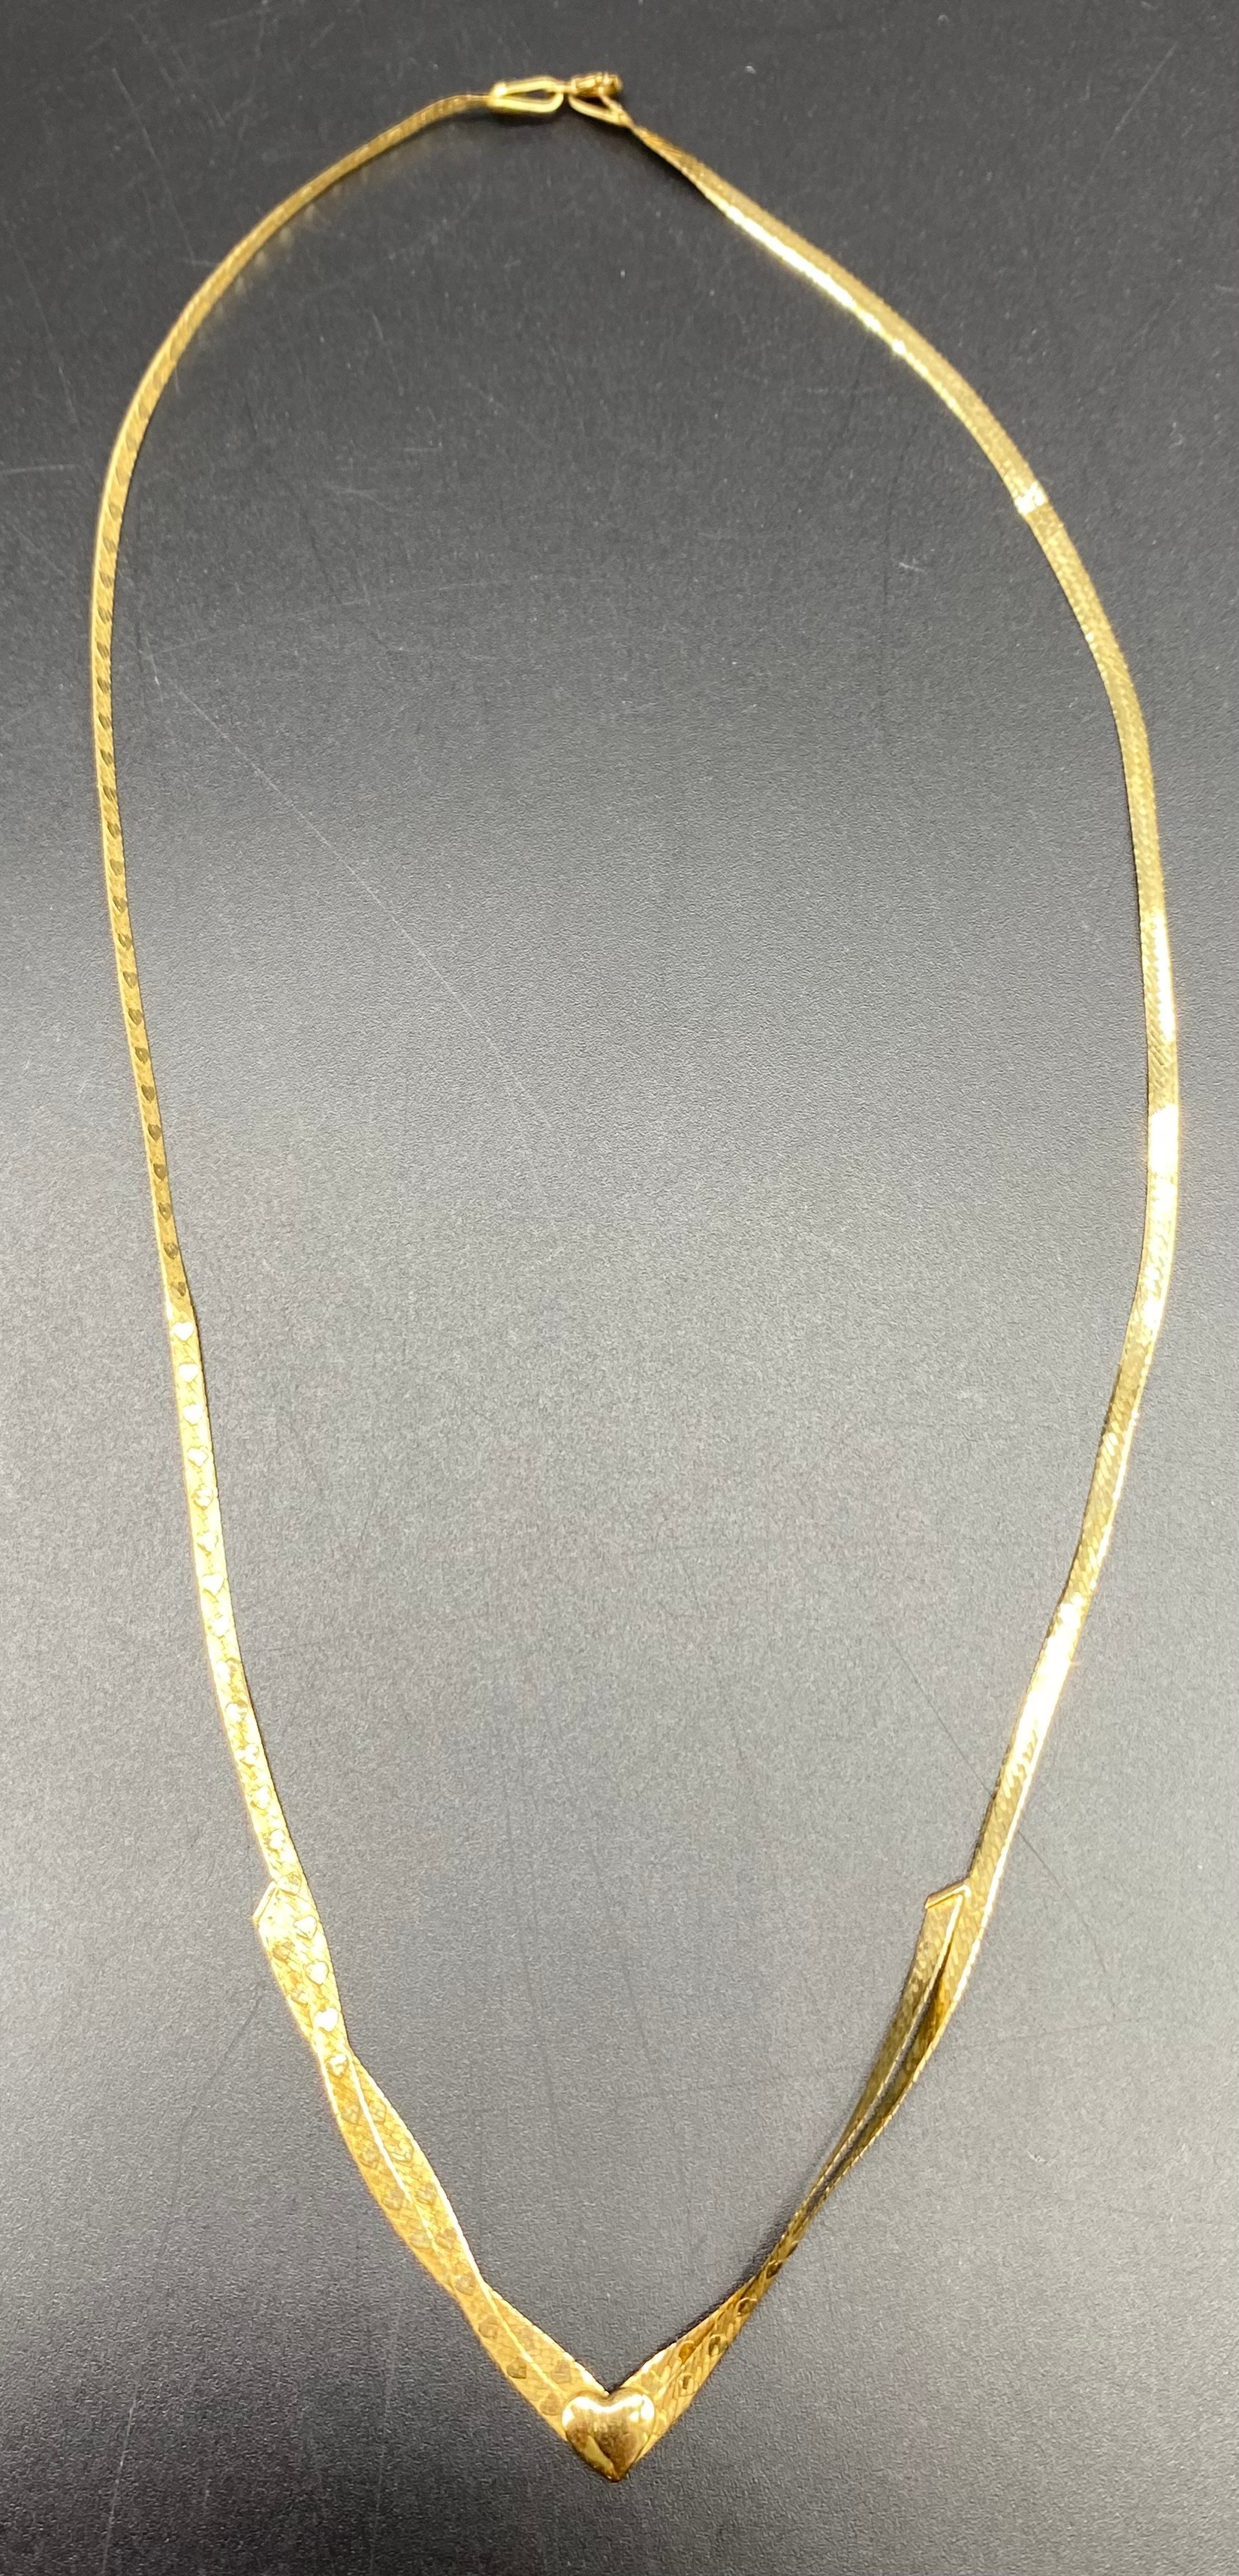 Two 9ct gold 375 hallmarked snake chain necklaces [5.77 Grams] - Image 3 of 6